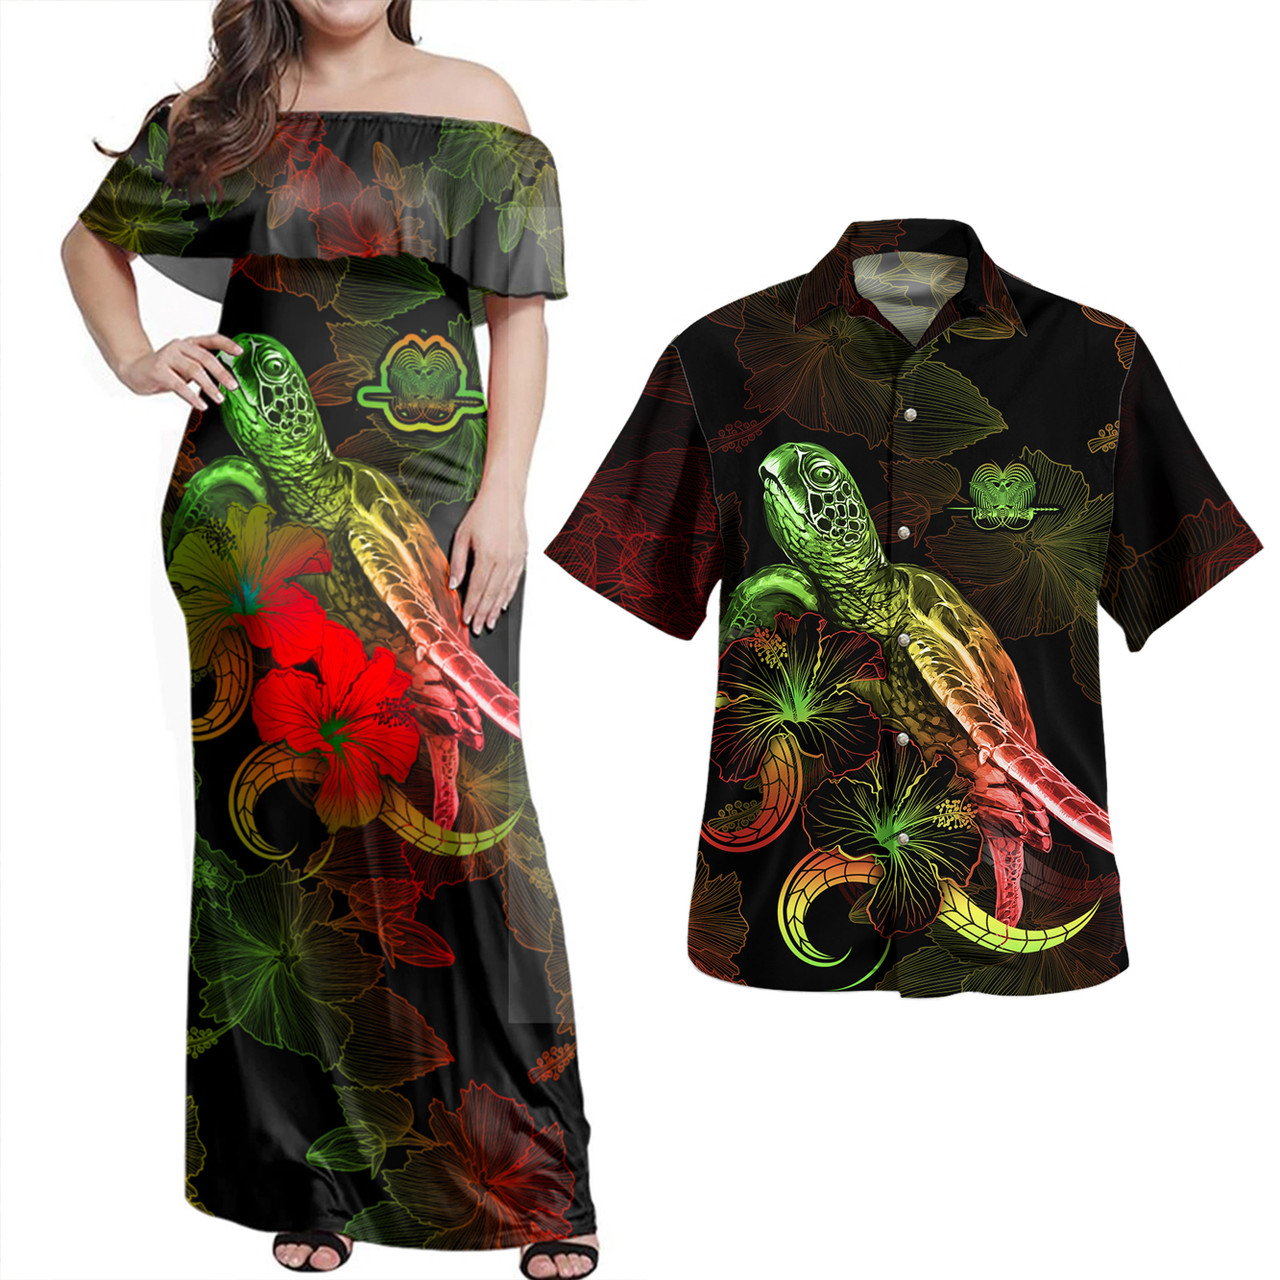 Papua New Guinea Combo Dress And Shirt - Sea Turtle With Blooming Hibiscus Flowers Reggae